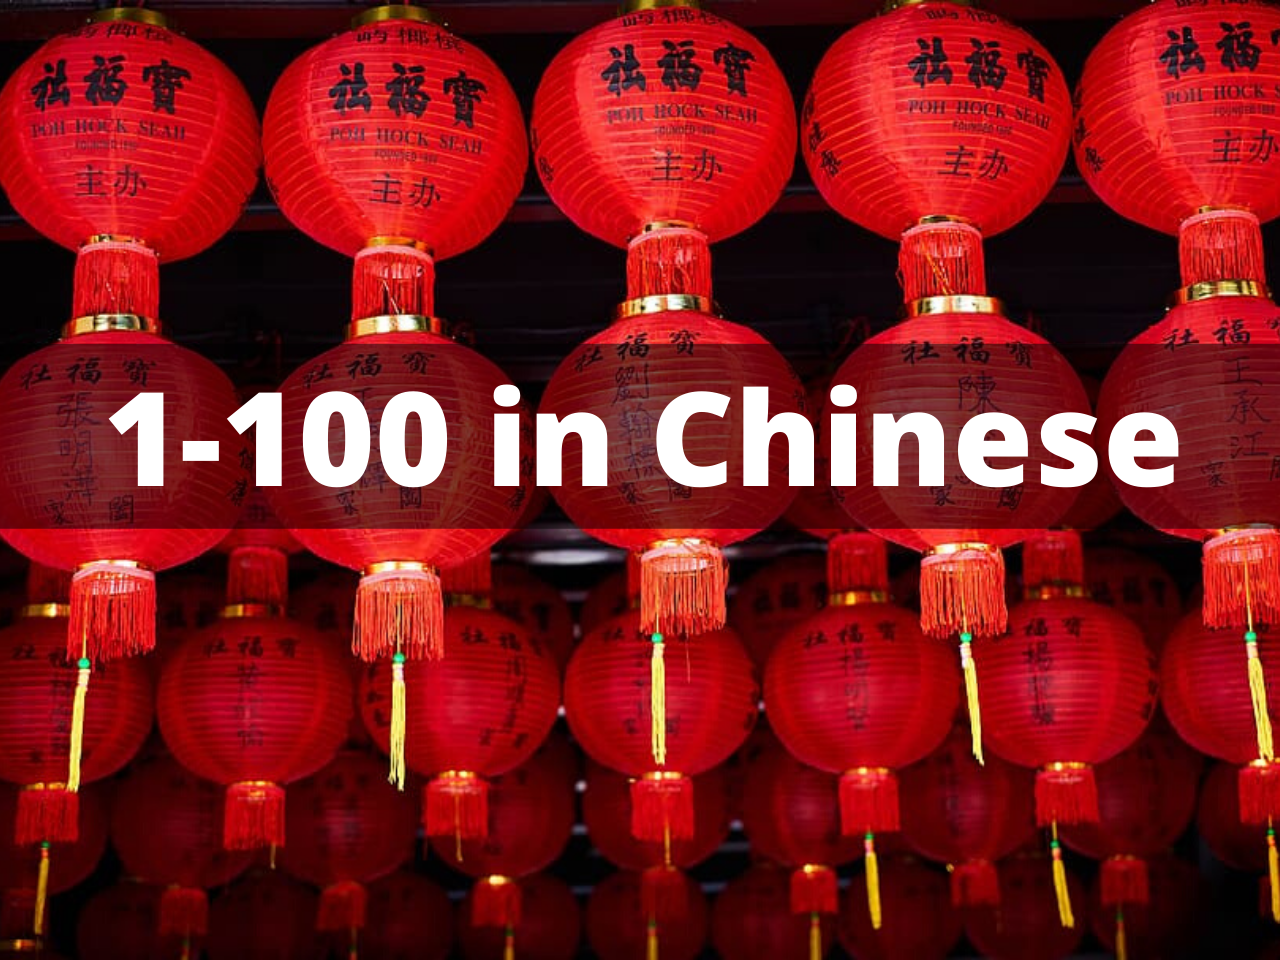 80 Terms Of Chinese Food Vocabulary